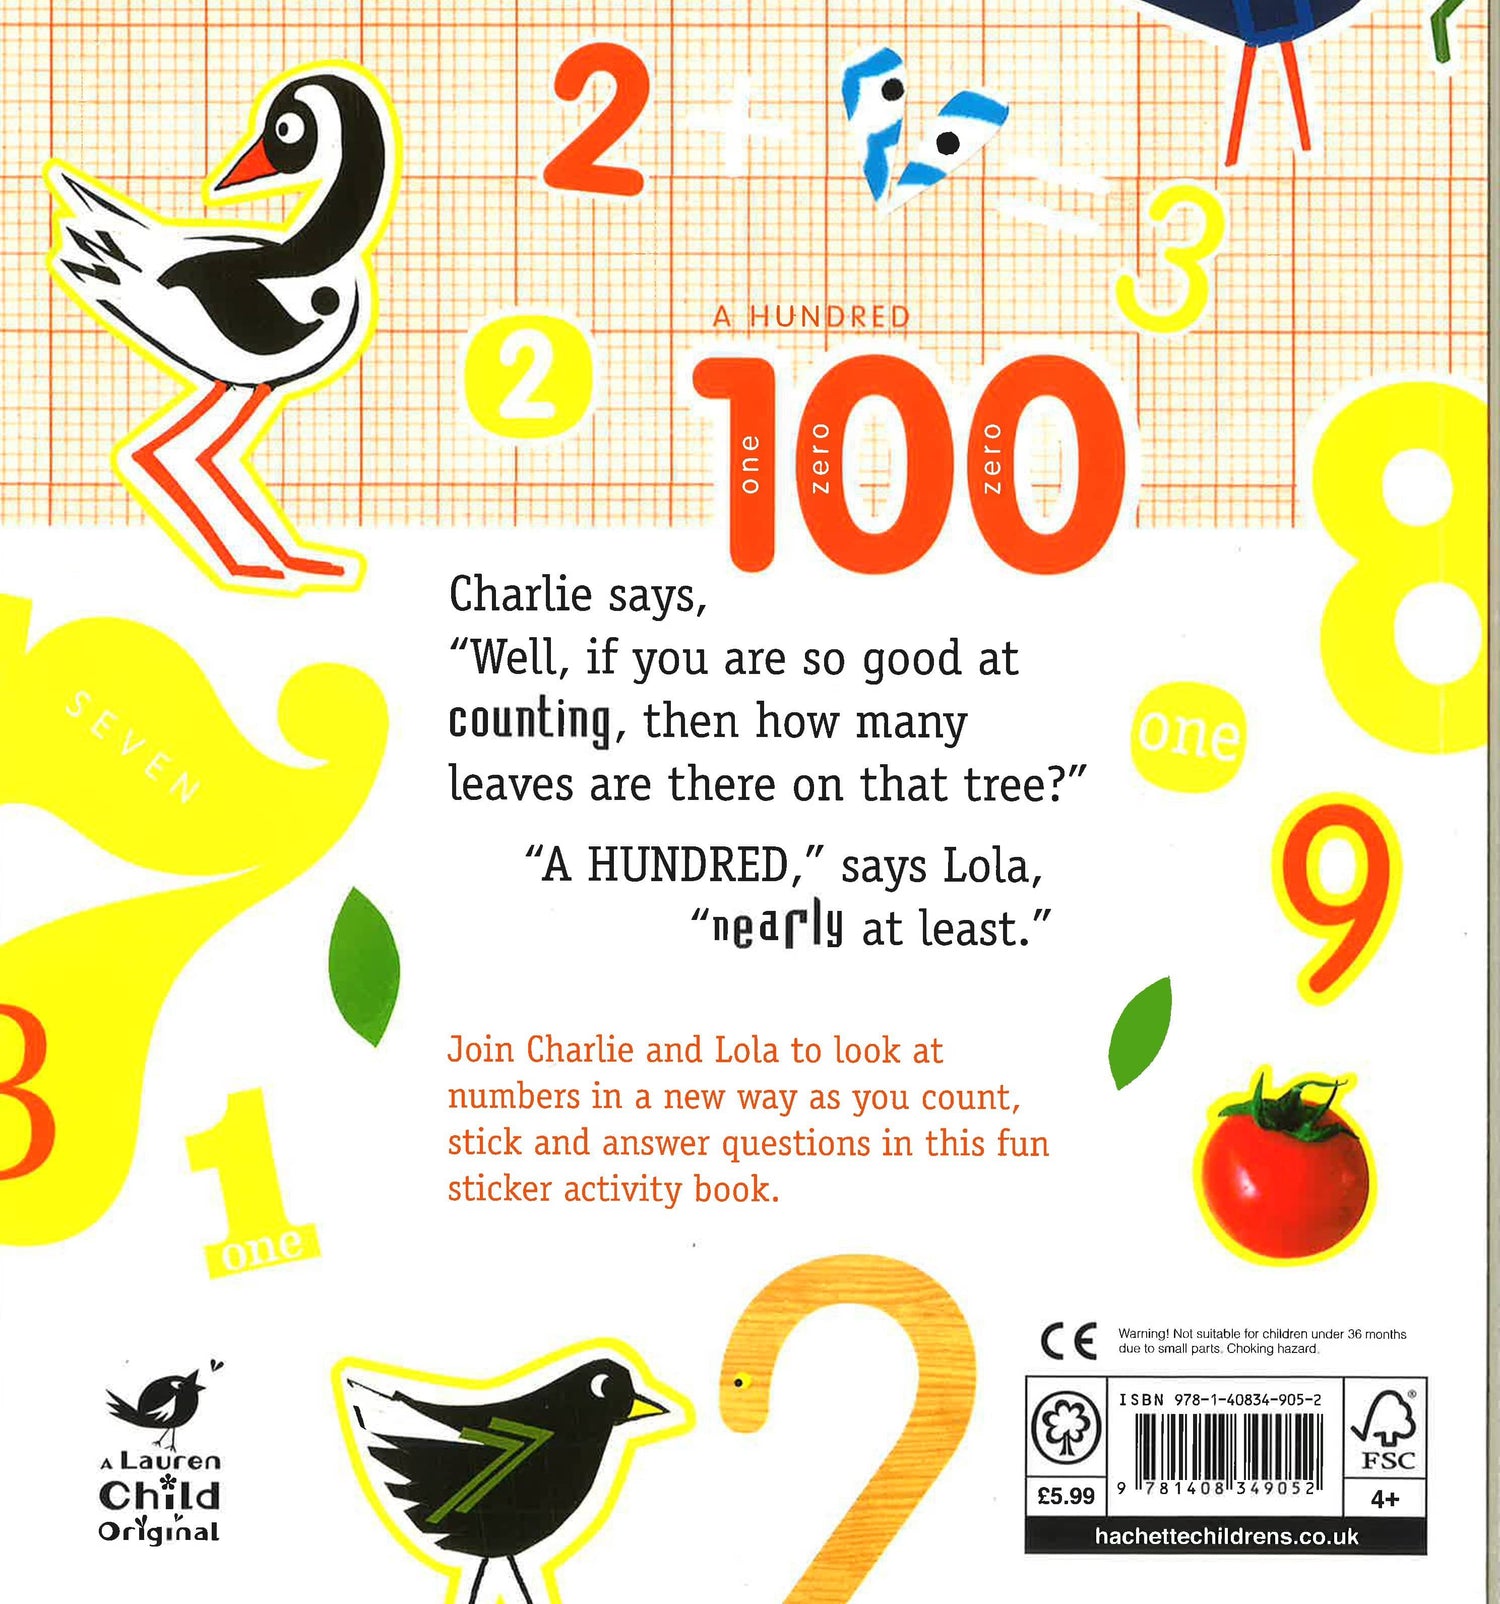 Charlie & Lola: Exactly One Numbers Sticker Activity Book